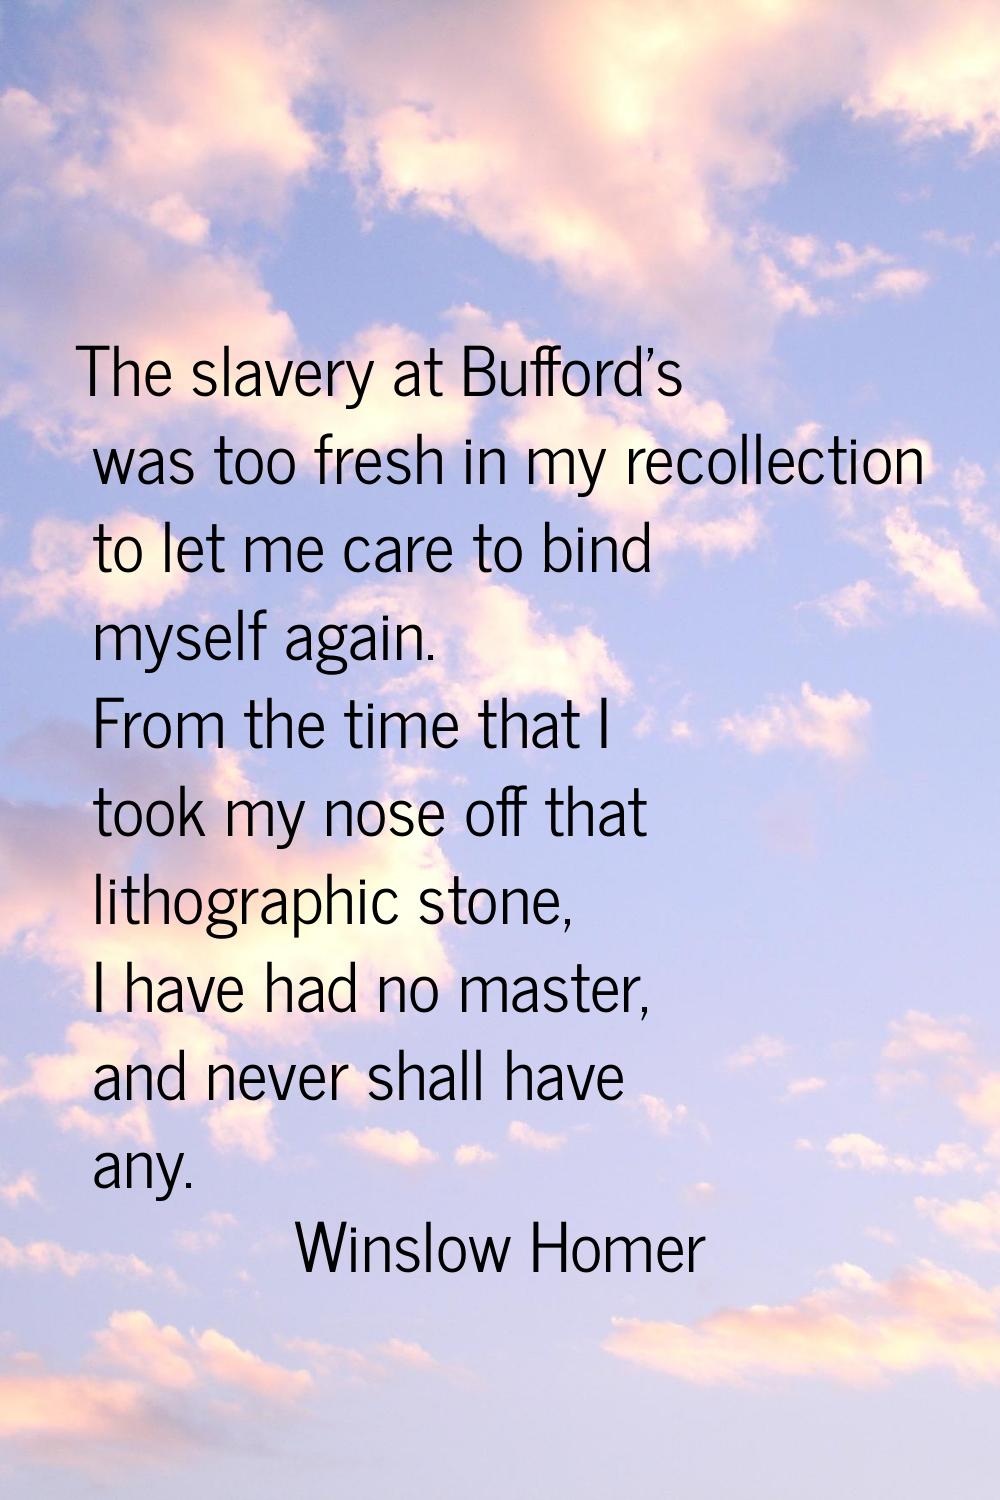 The slavery at Bufford's was too fresh in my recollection to let me care to bind myself again. From